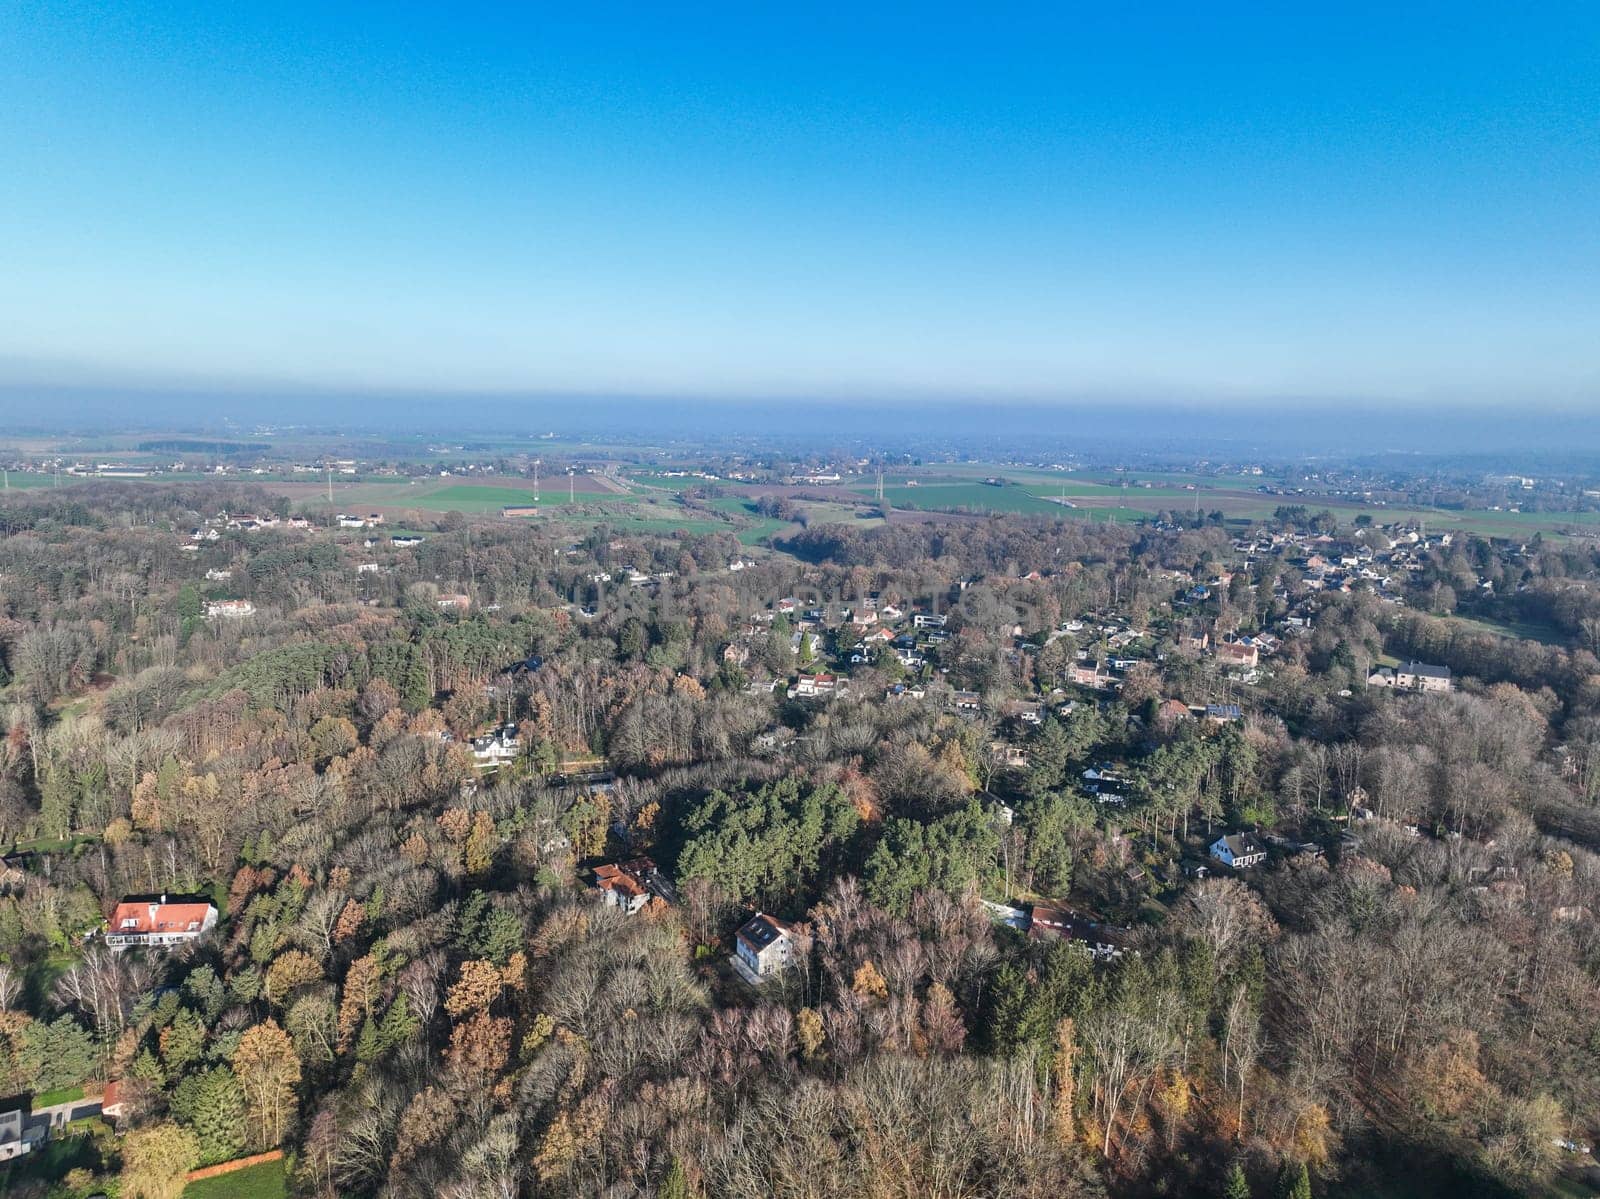 Aerial view of small countryside town in the area of Walloon, Belgium by Bonandbon